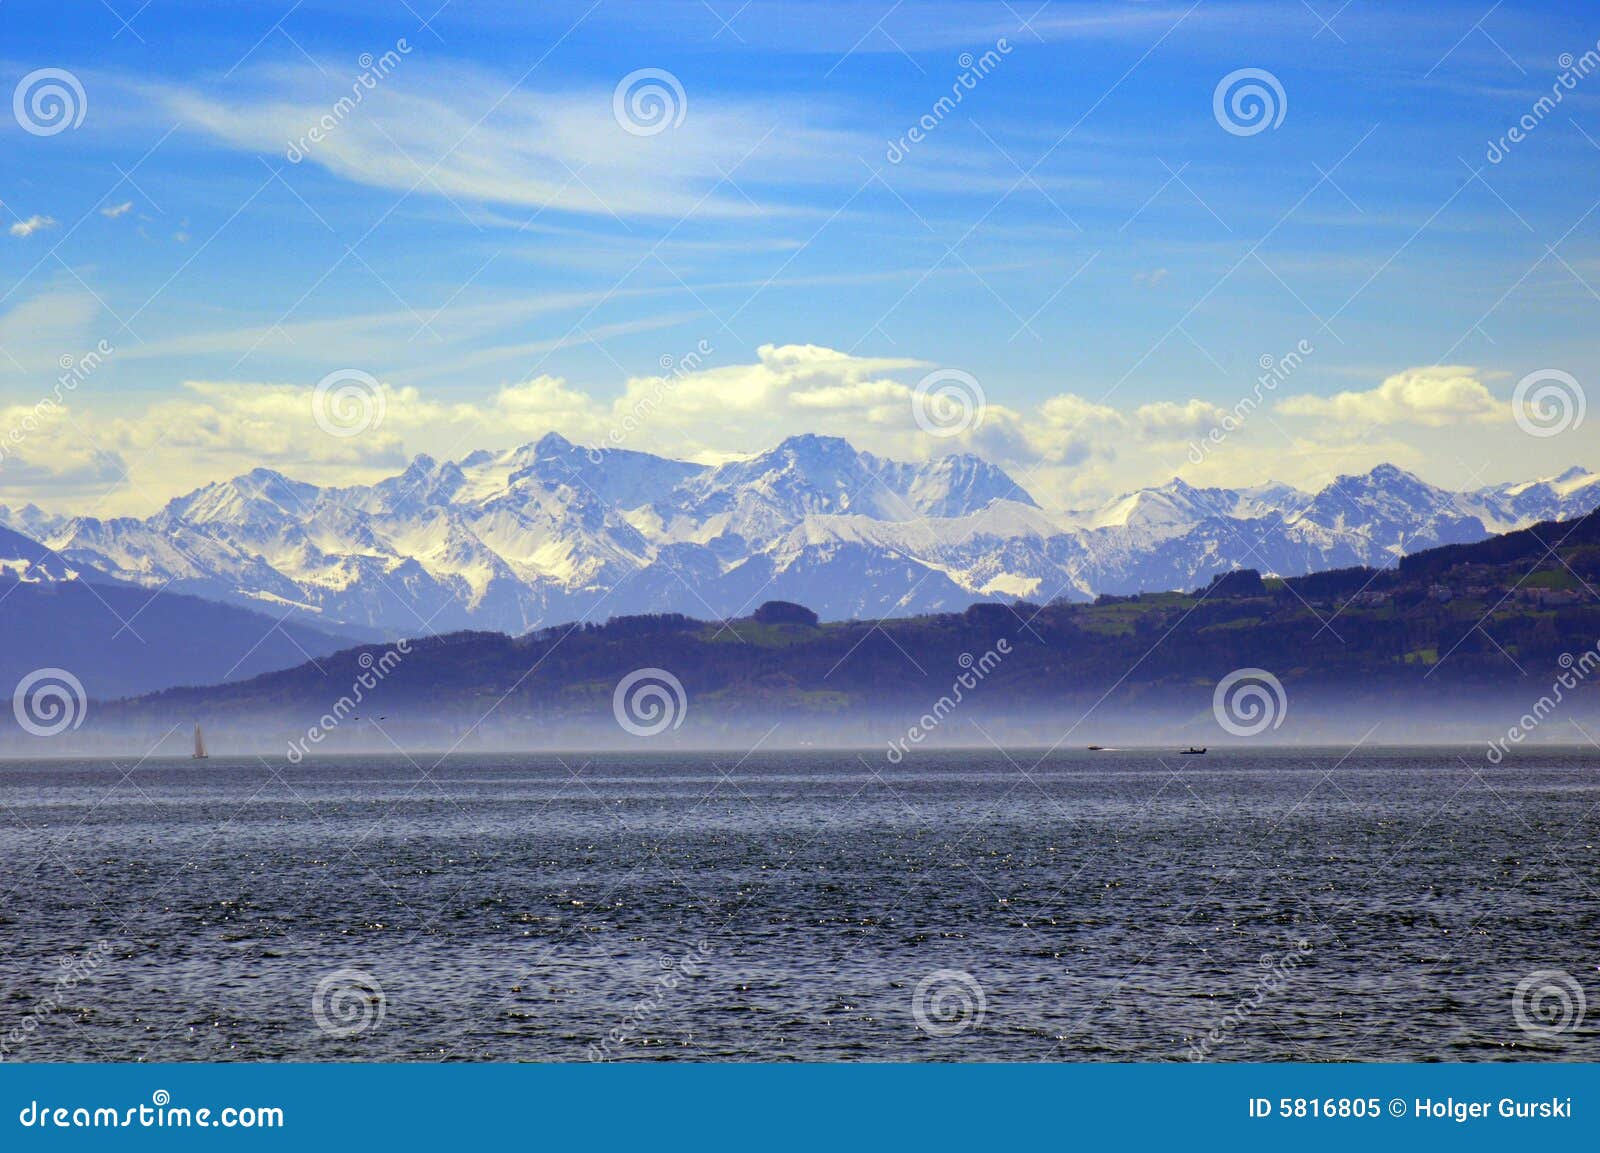 lake of constance